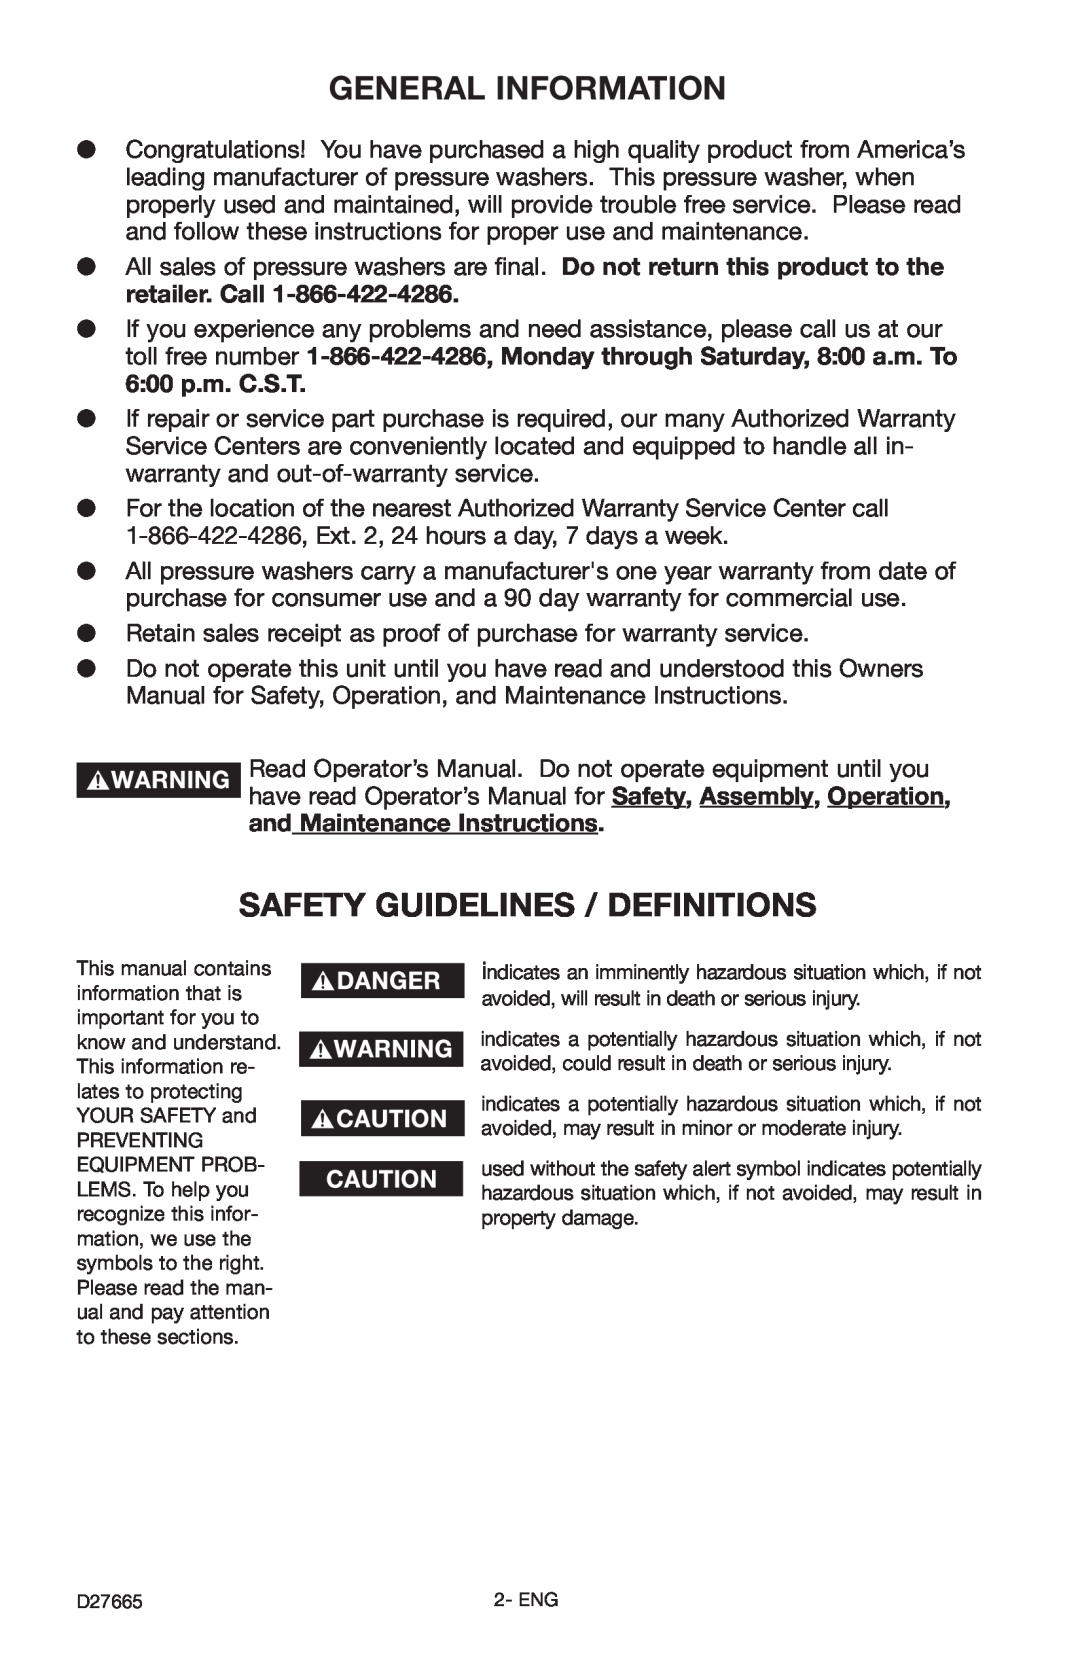 Delta D27665, D1600e instruction manual General Information, Safety Guidelines / Definitions, and Maintenance Instructions 